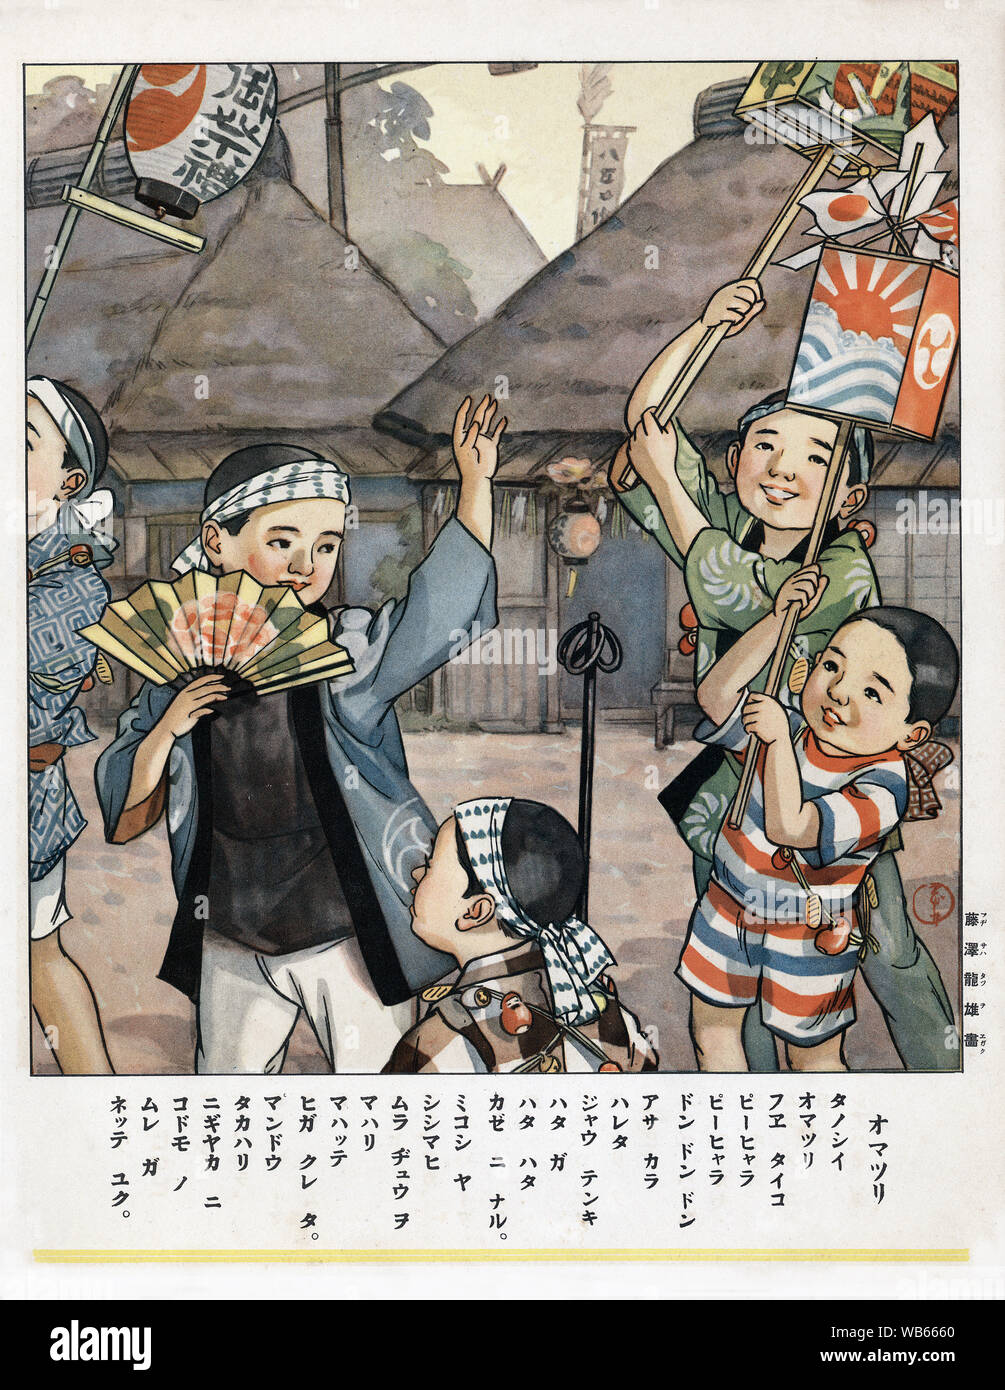 [ 1930s Japan - Illustration of Japanese Children at Festival ] —   A print with verse for elementary school children showing a matsuri (religious festival).  20th century vintage book illustration. Stock Photo